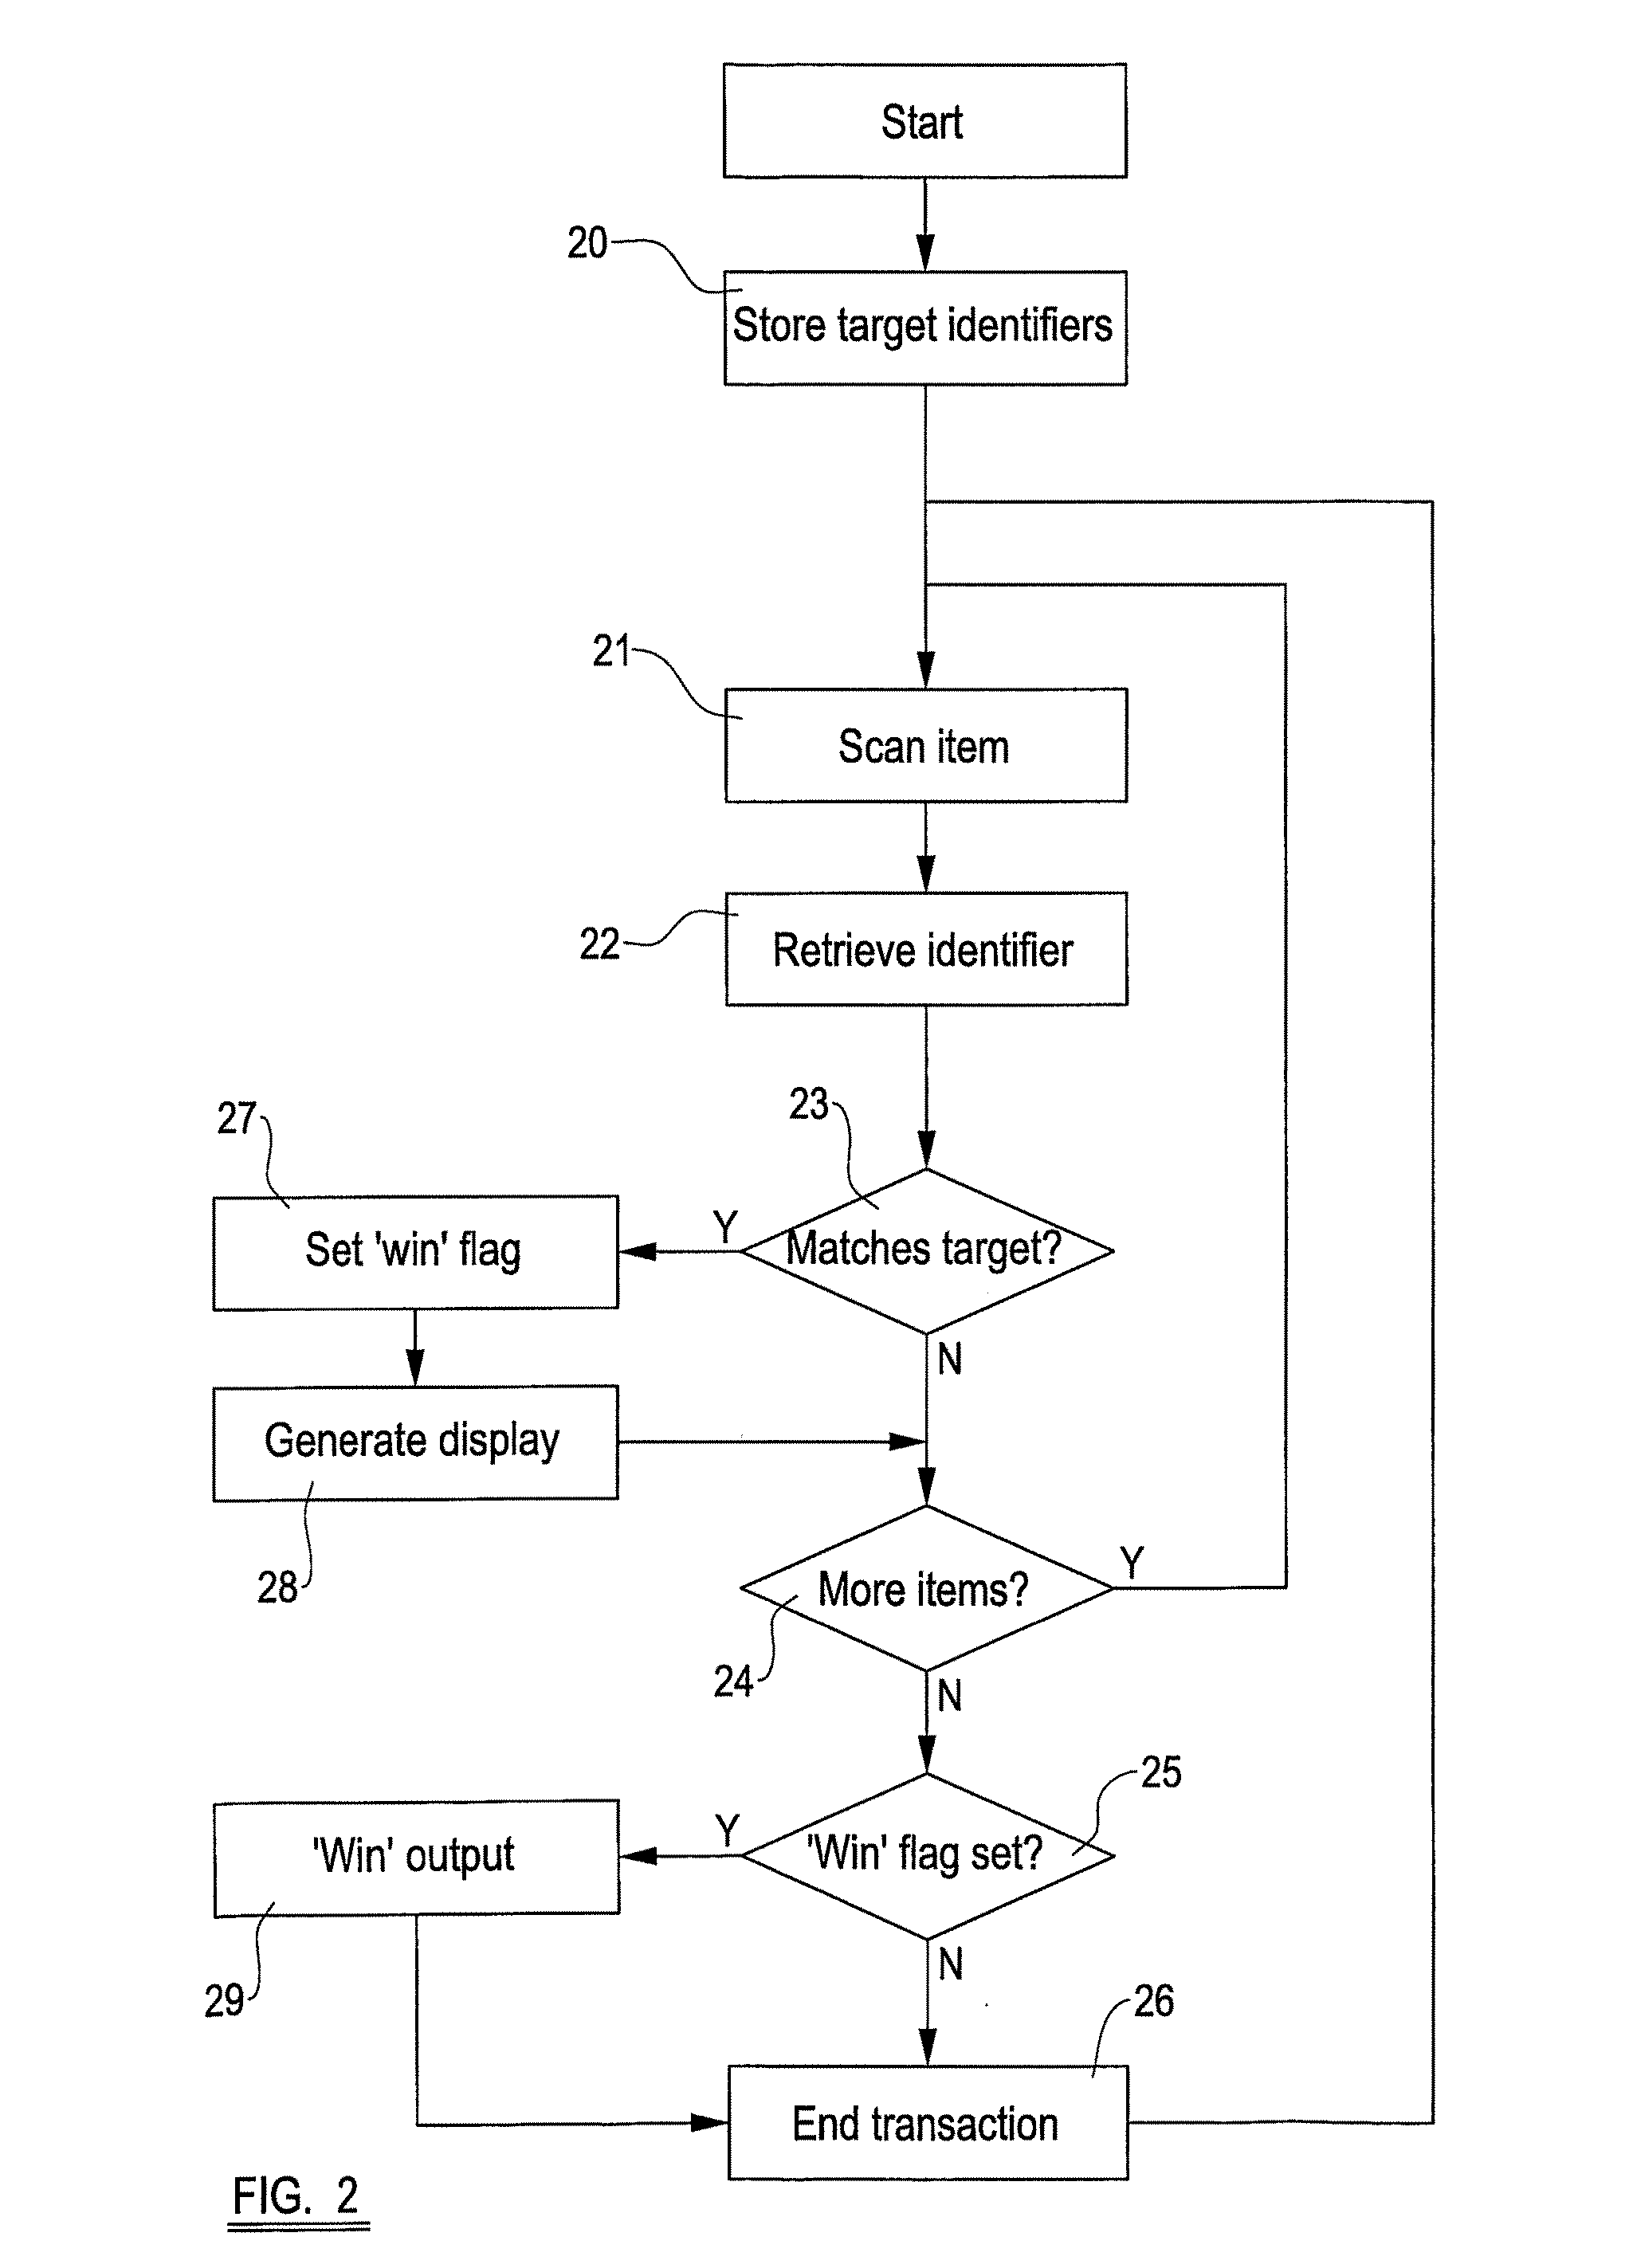 Apparatus and Method for Identifying Purchase Items and Storing Target Identifiers